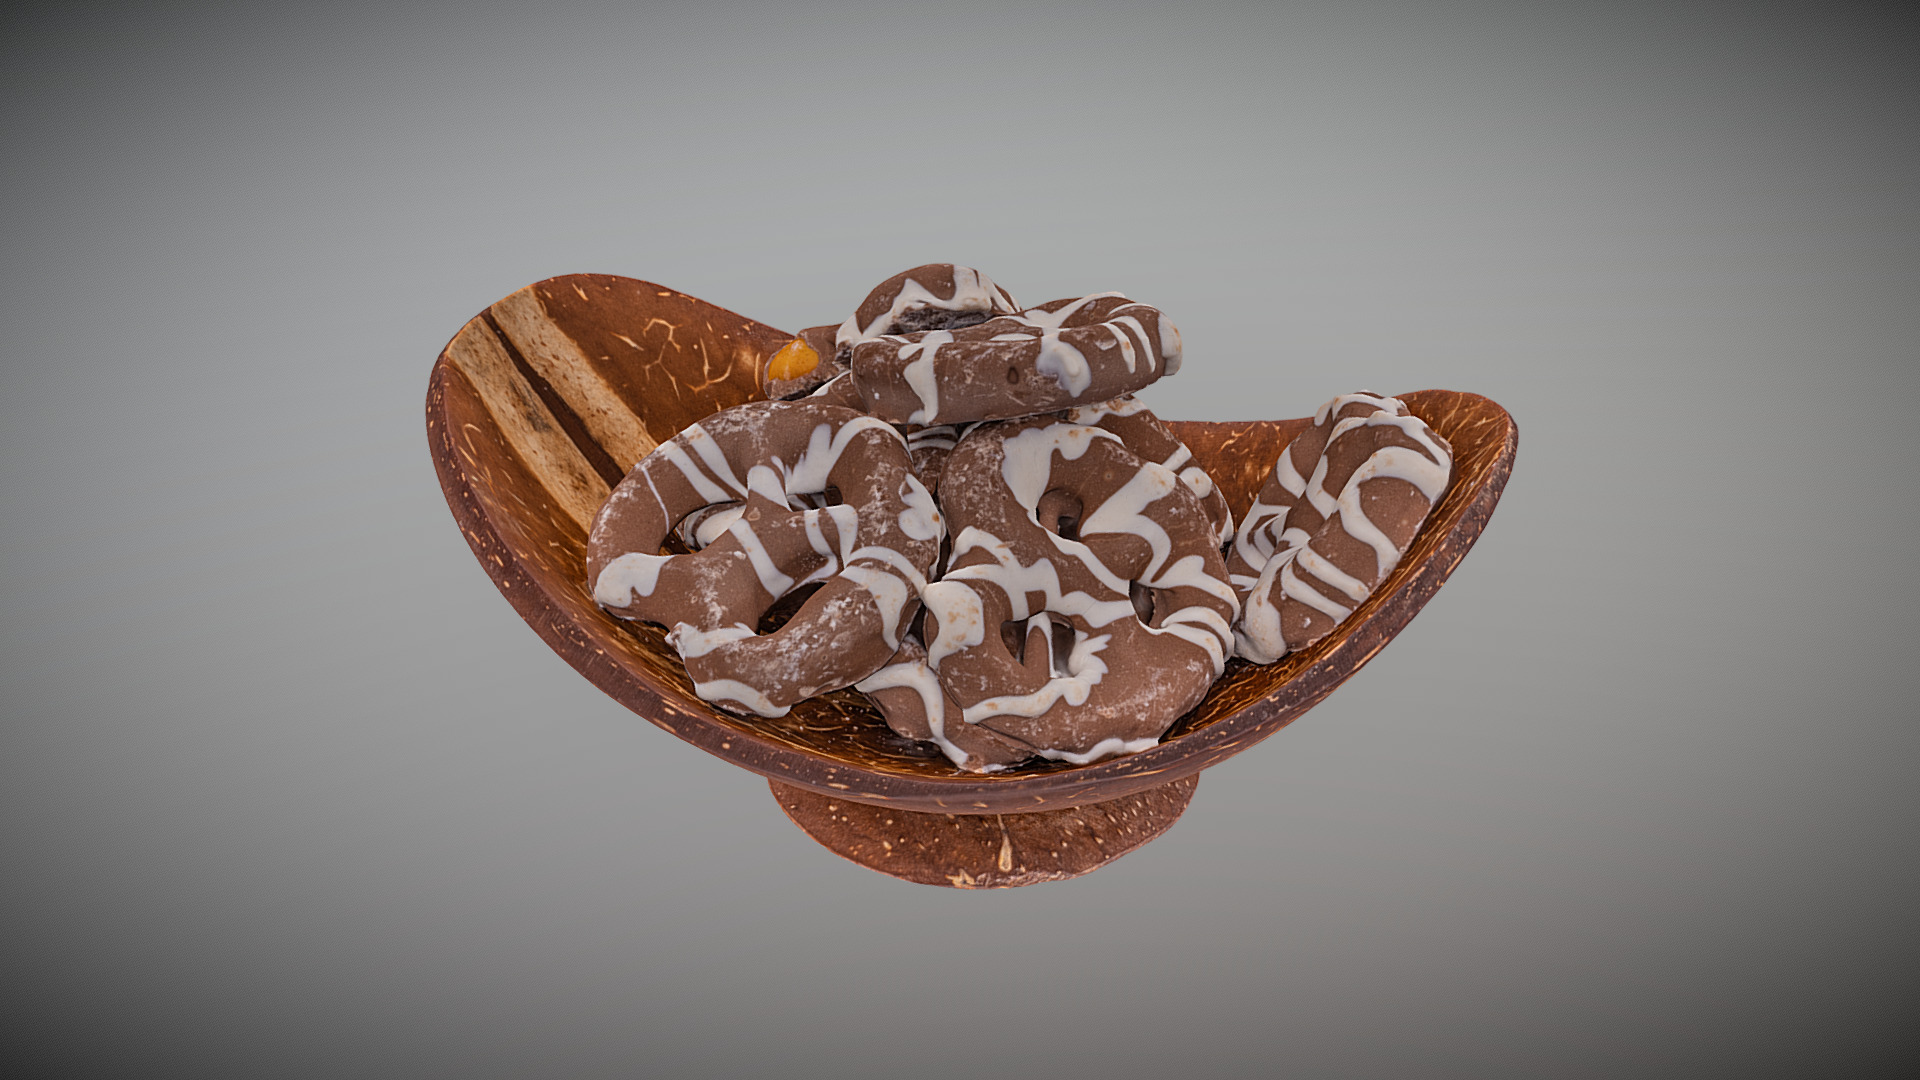 3D model Chocolate Covered Pretzels in Coconut Bowl - This is a 3D model of the Chocolate Covered Pretzels in Coconut Bowl. The 3D model is about a chocolate candy bar.